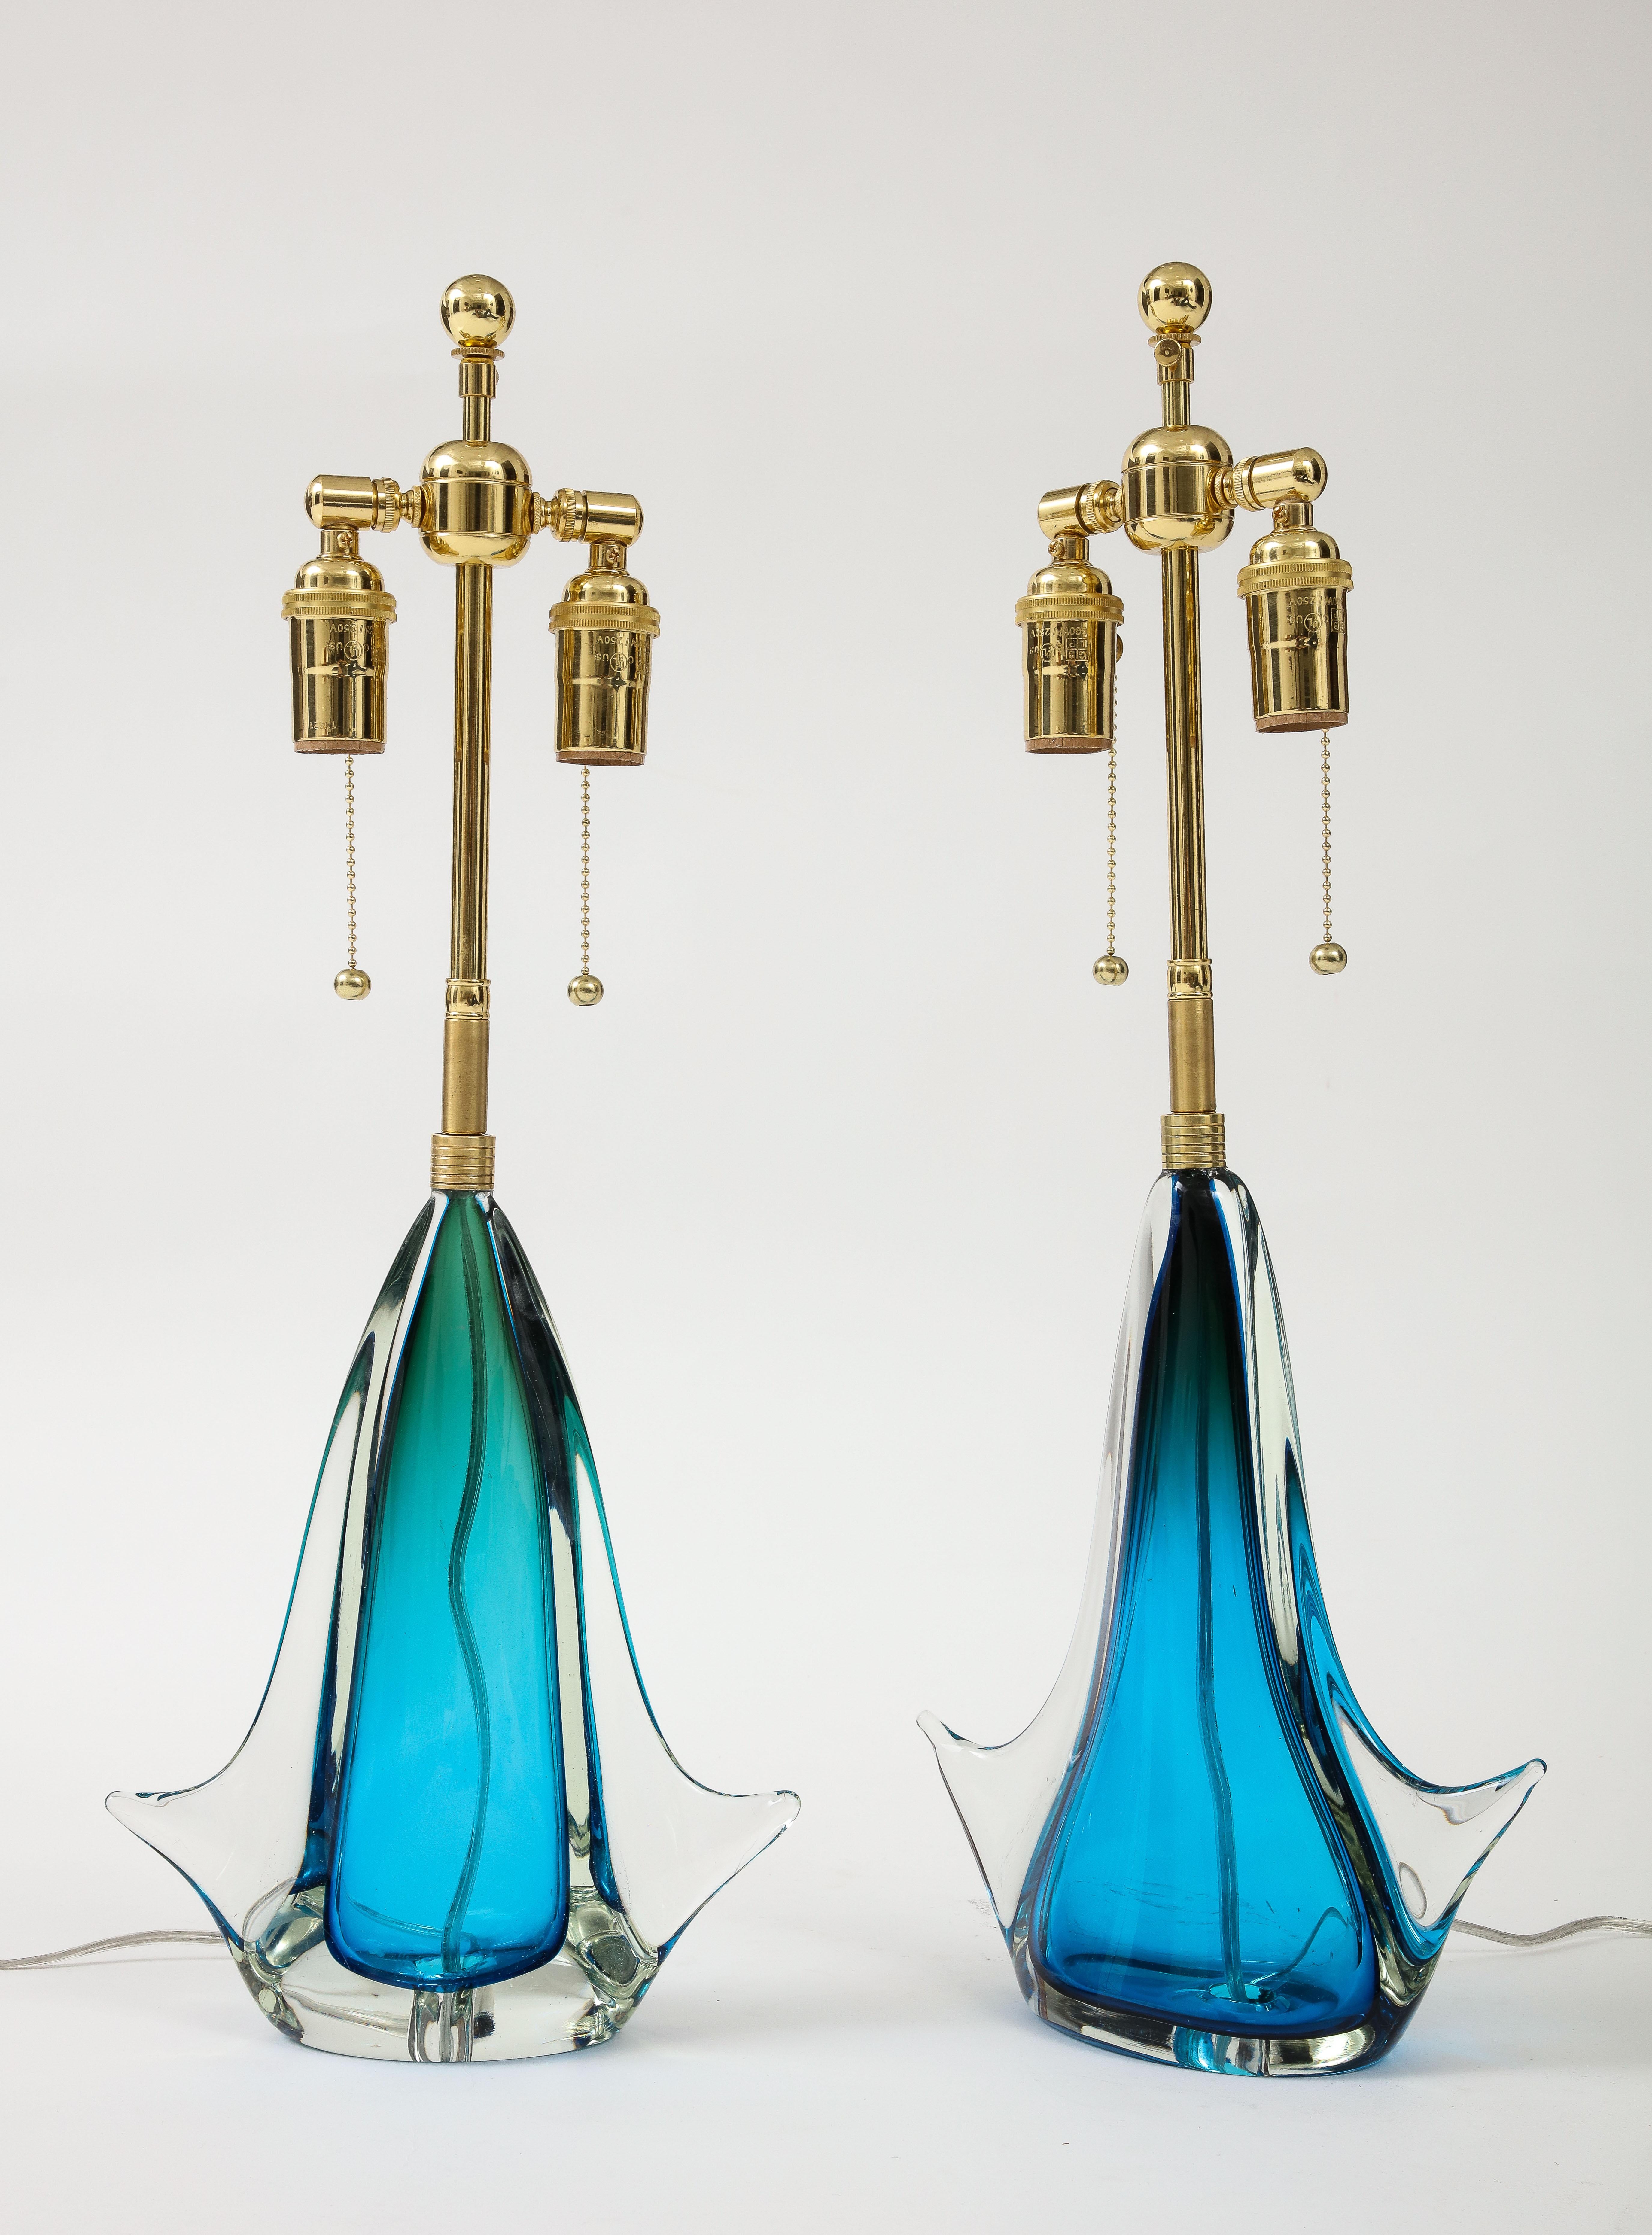 Pair of hand blown Murano glass lamps in a stunning blue color.
The lamps have been Newly rewired with adjustable polished Brass double clusters that take standard size light bulbs.
As with all hand blown glass the colors and forms vary.